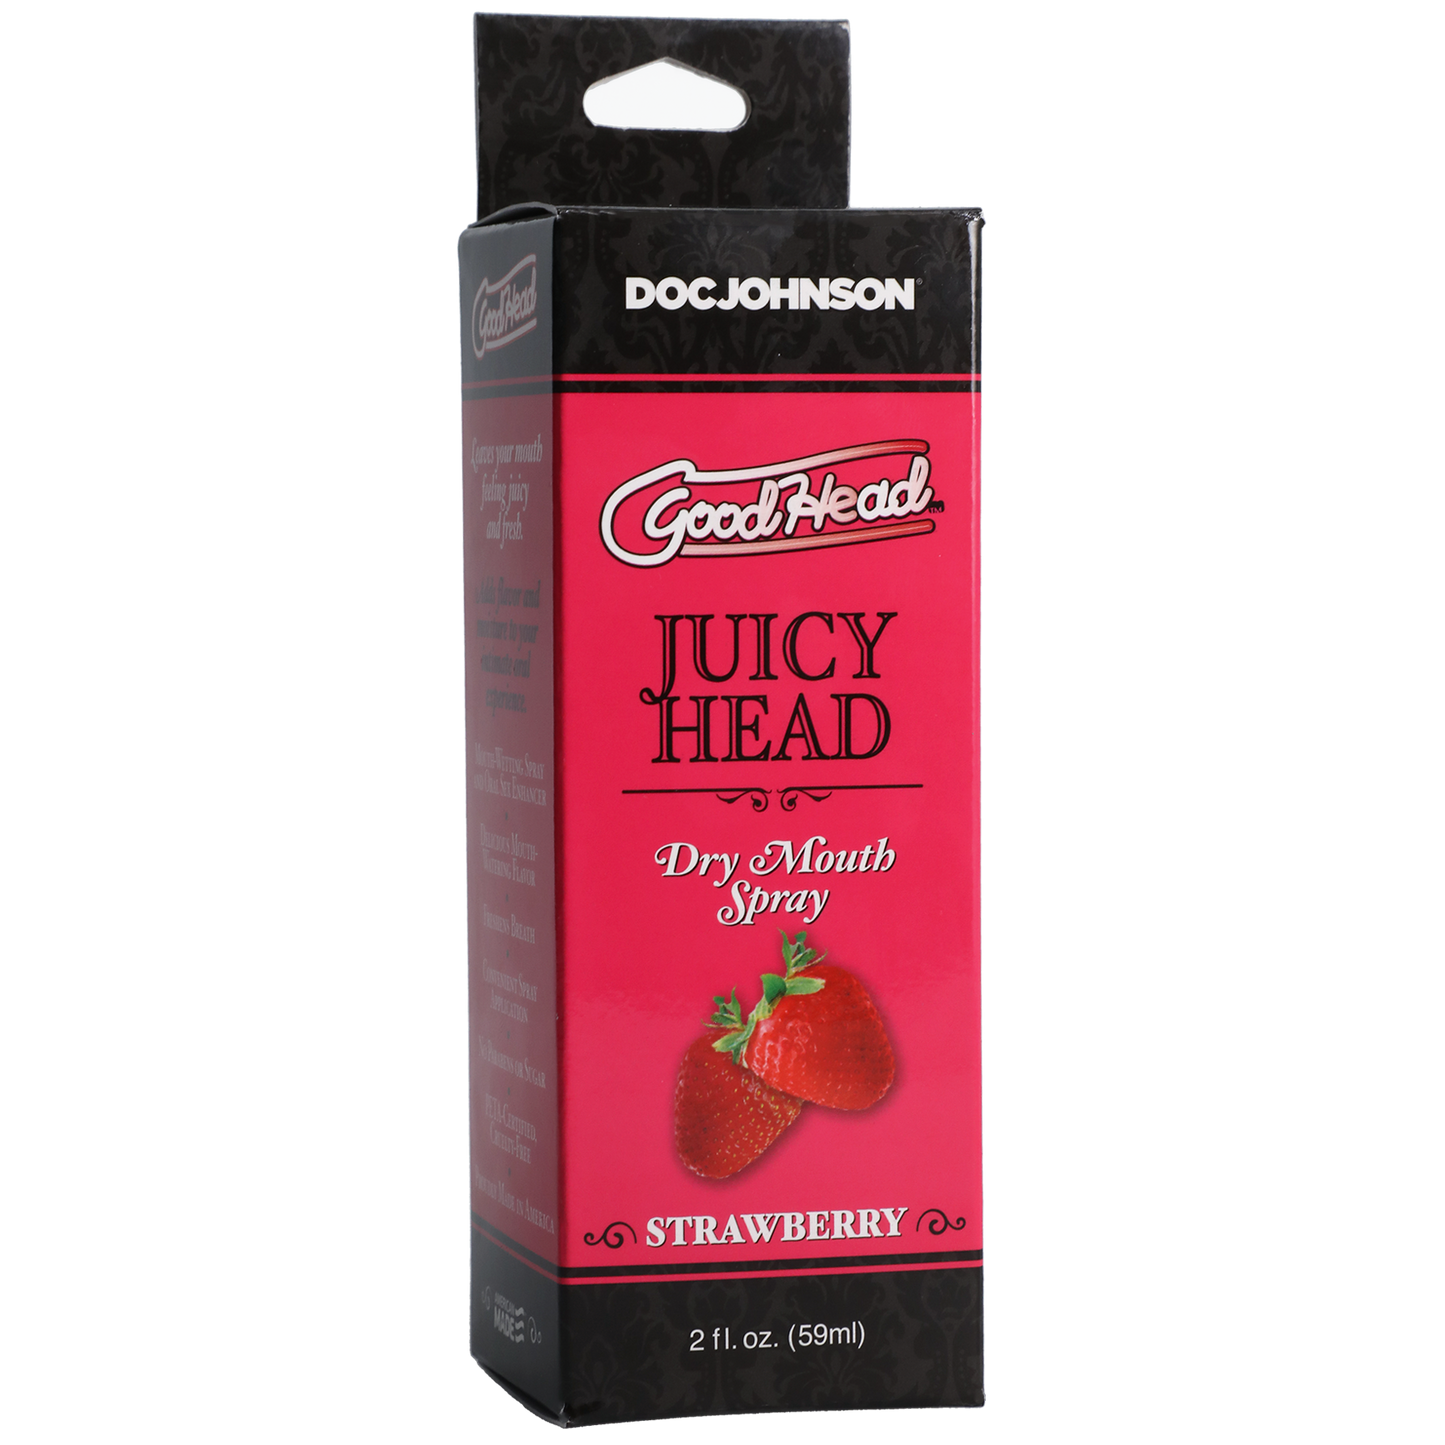 Photo of the package for the GoodHead Juicy Head from Doc Johnson (strawberry).